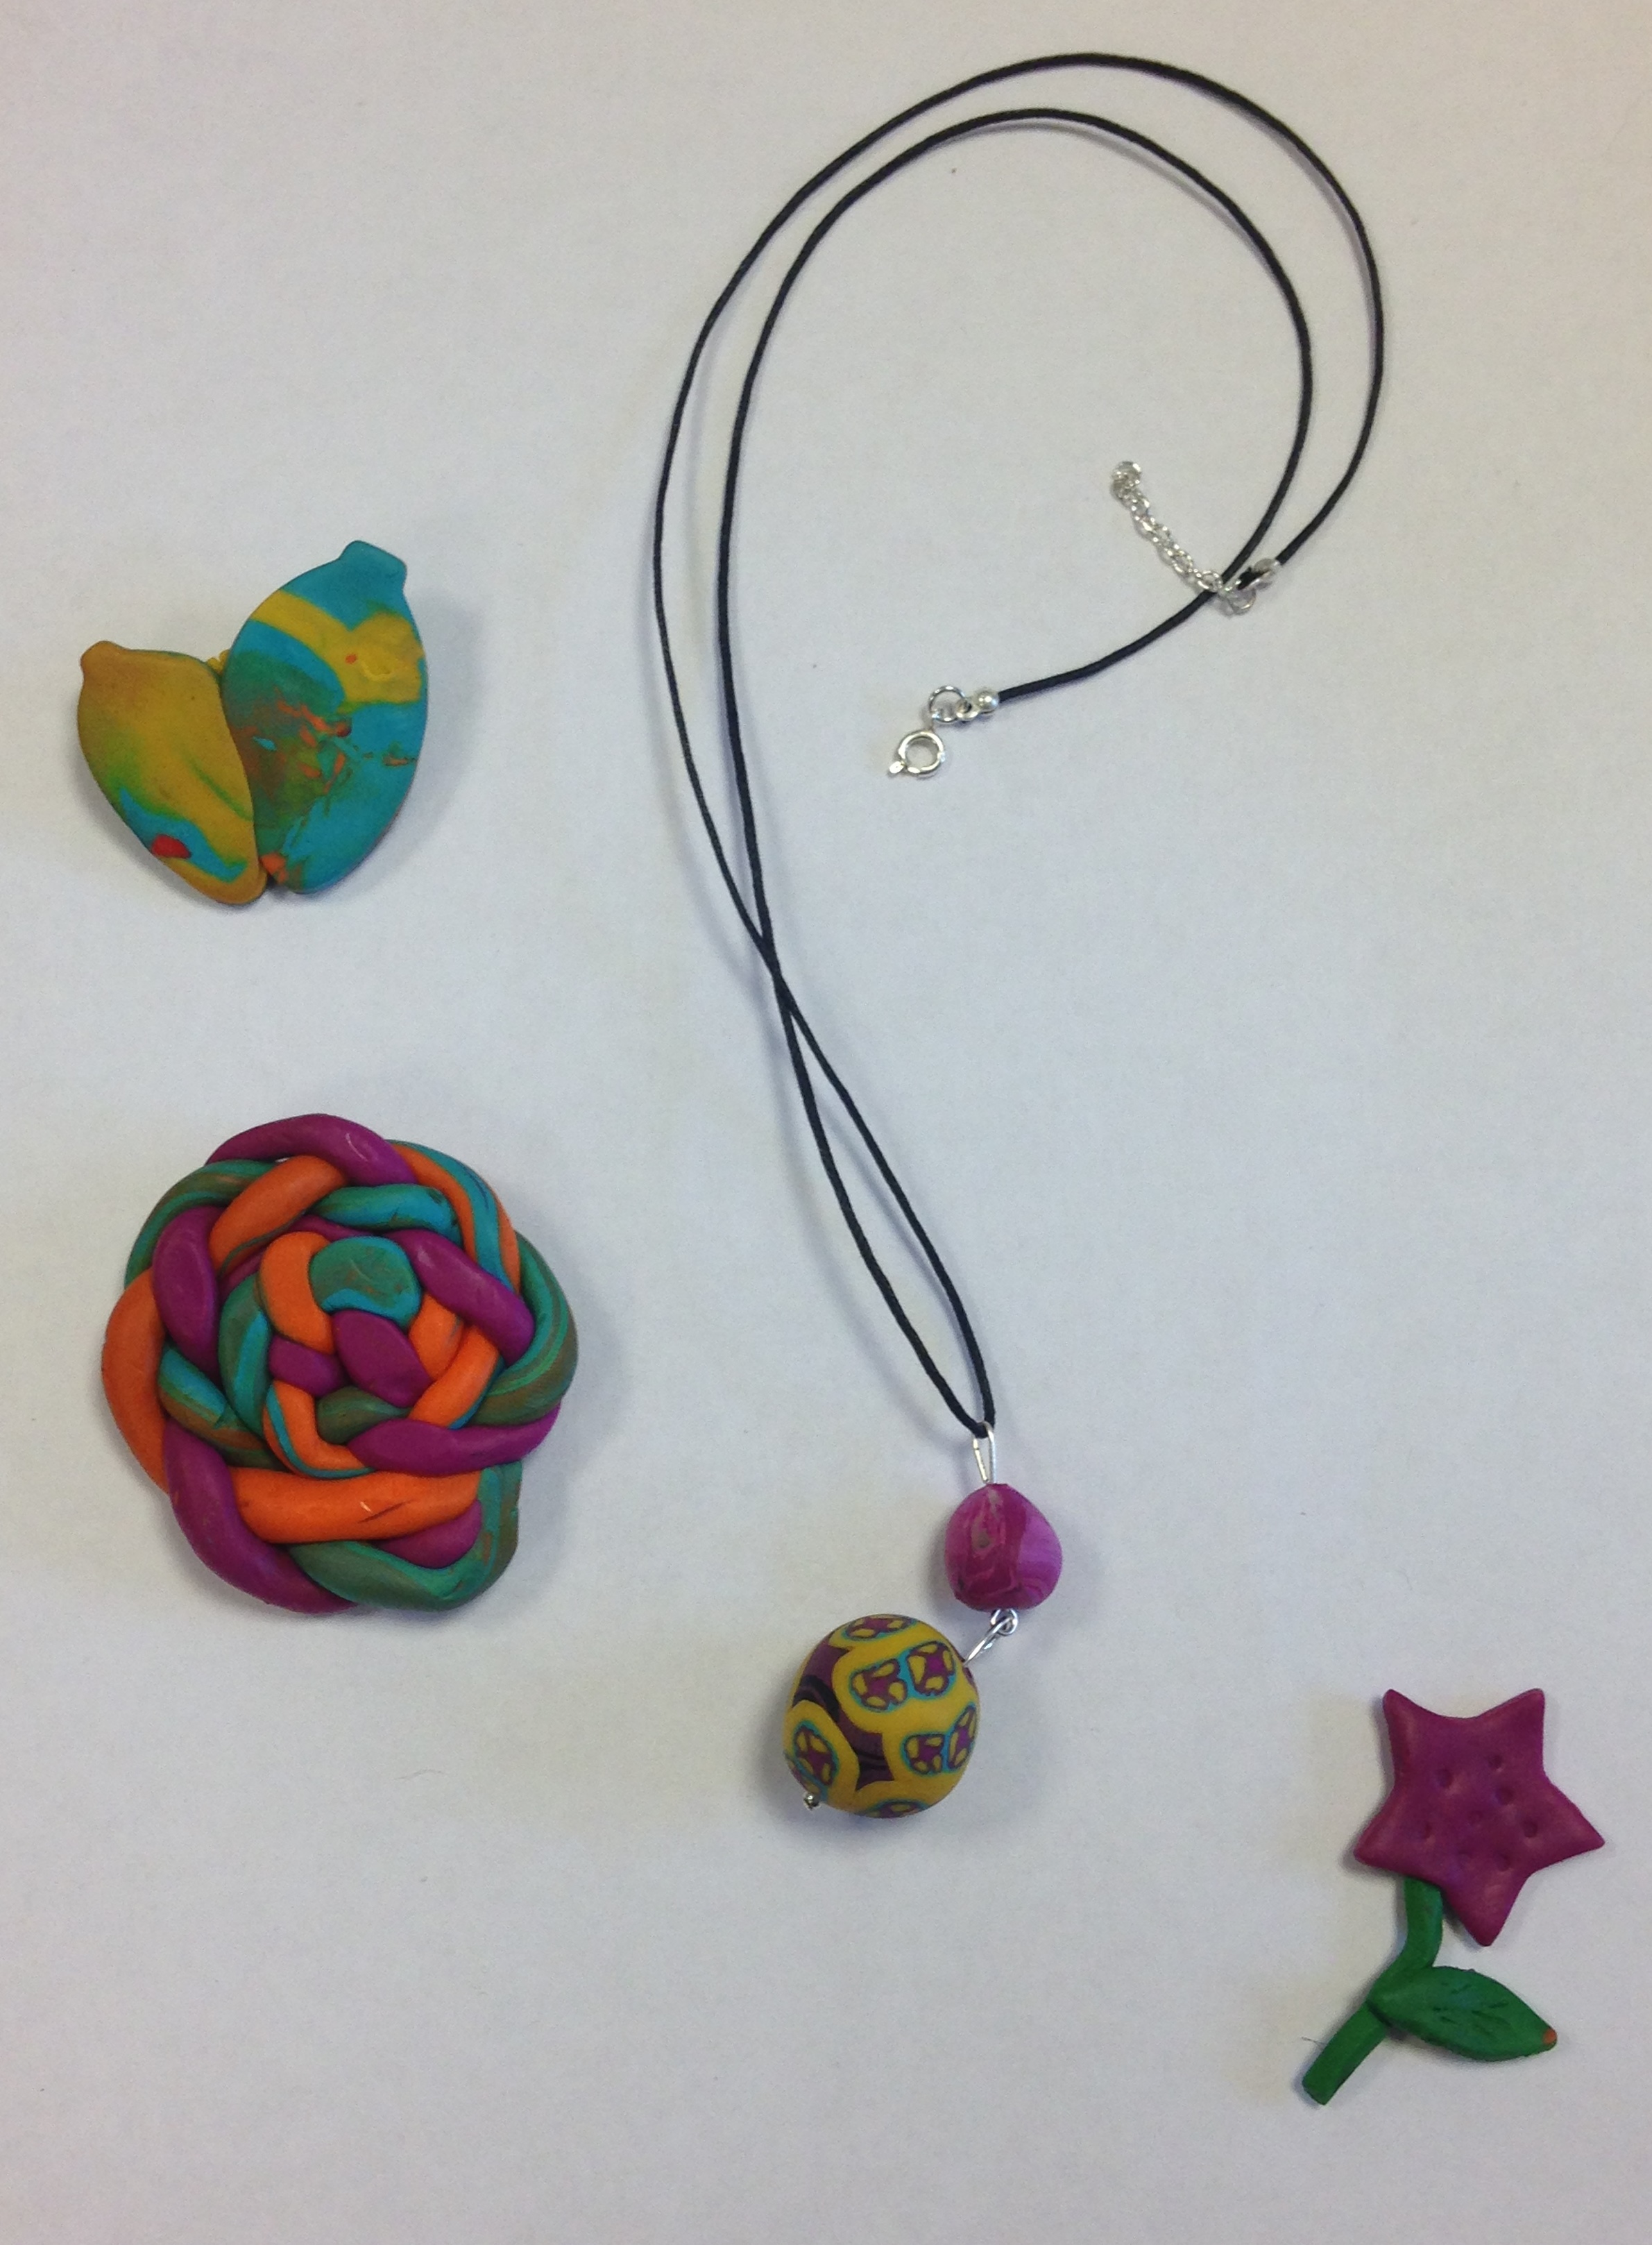 a flower, necklace and two other colorful pieces of clay